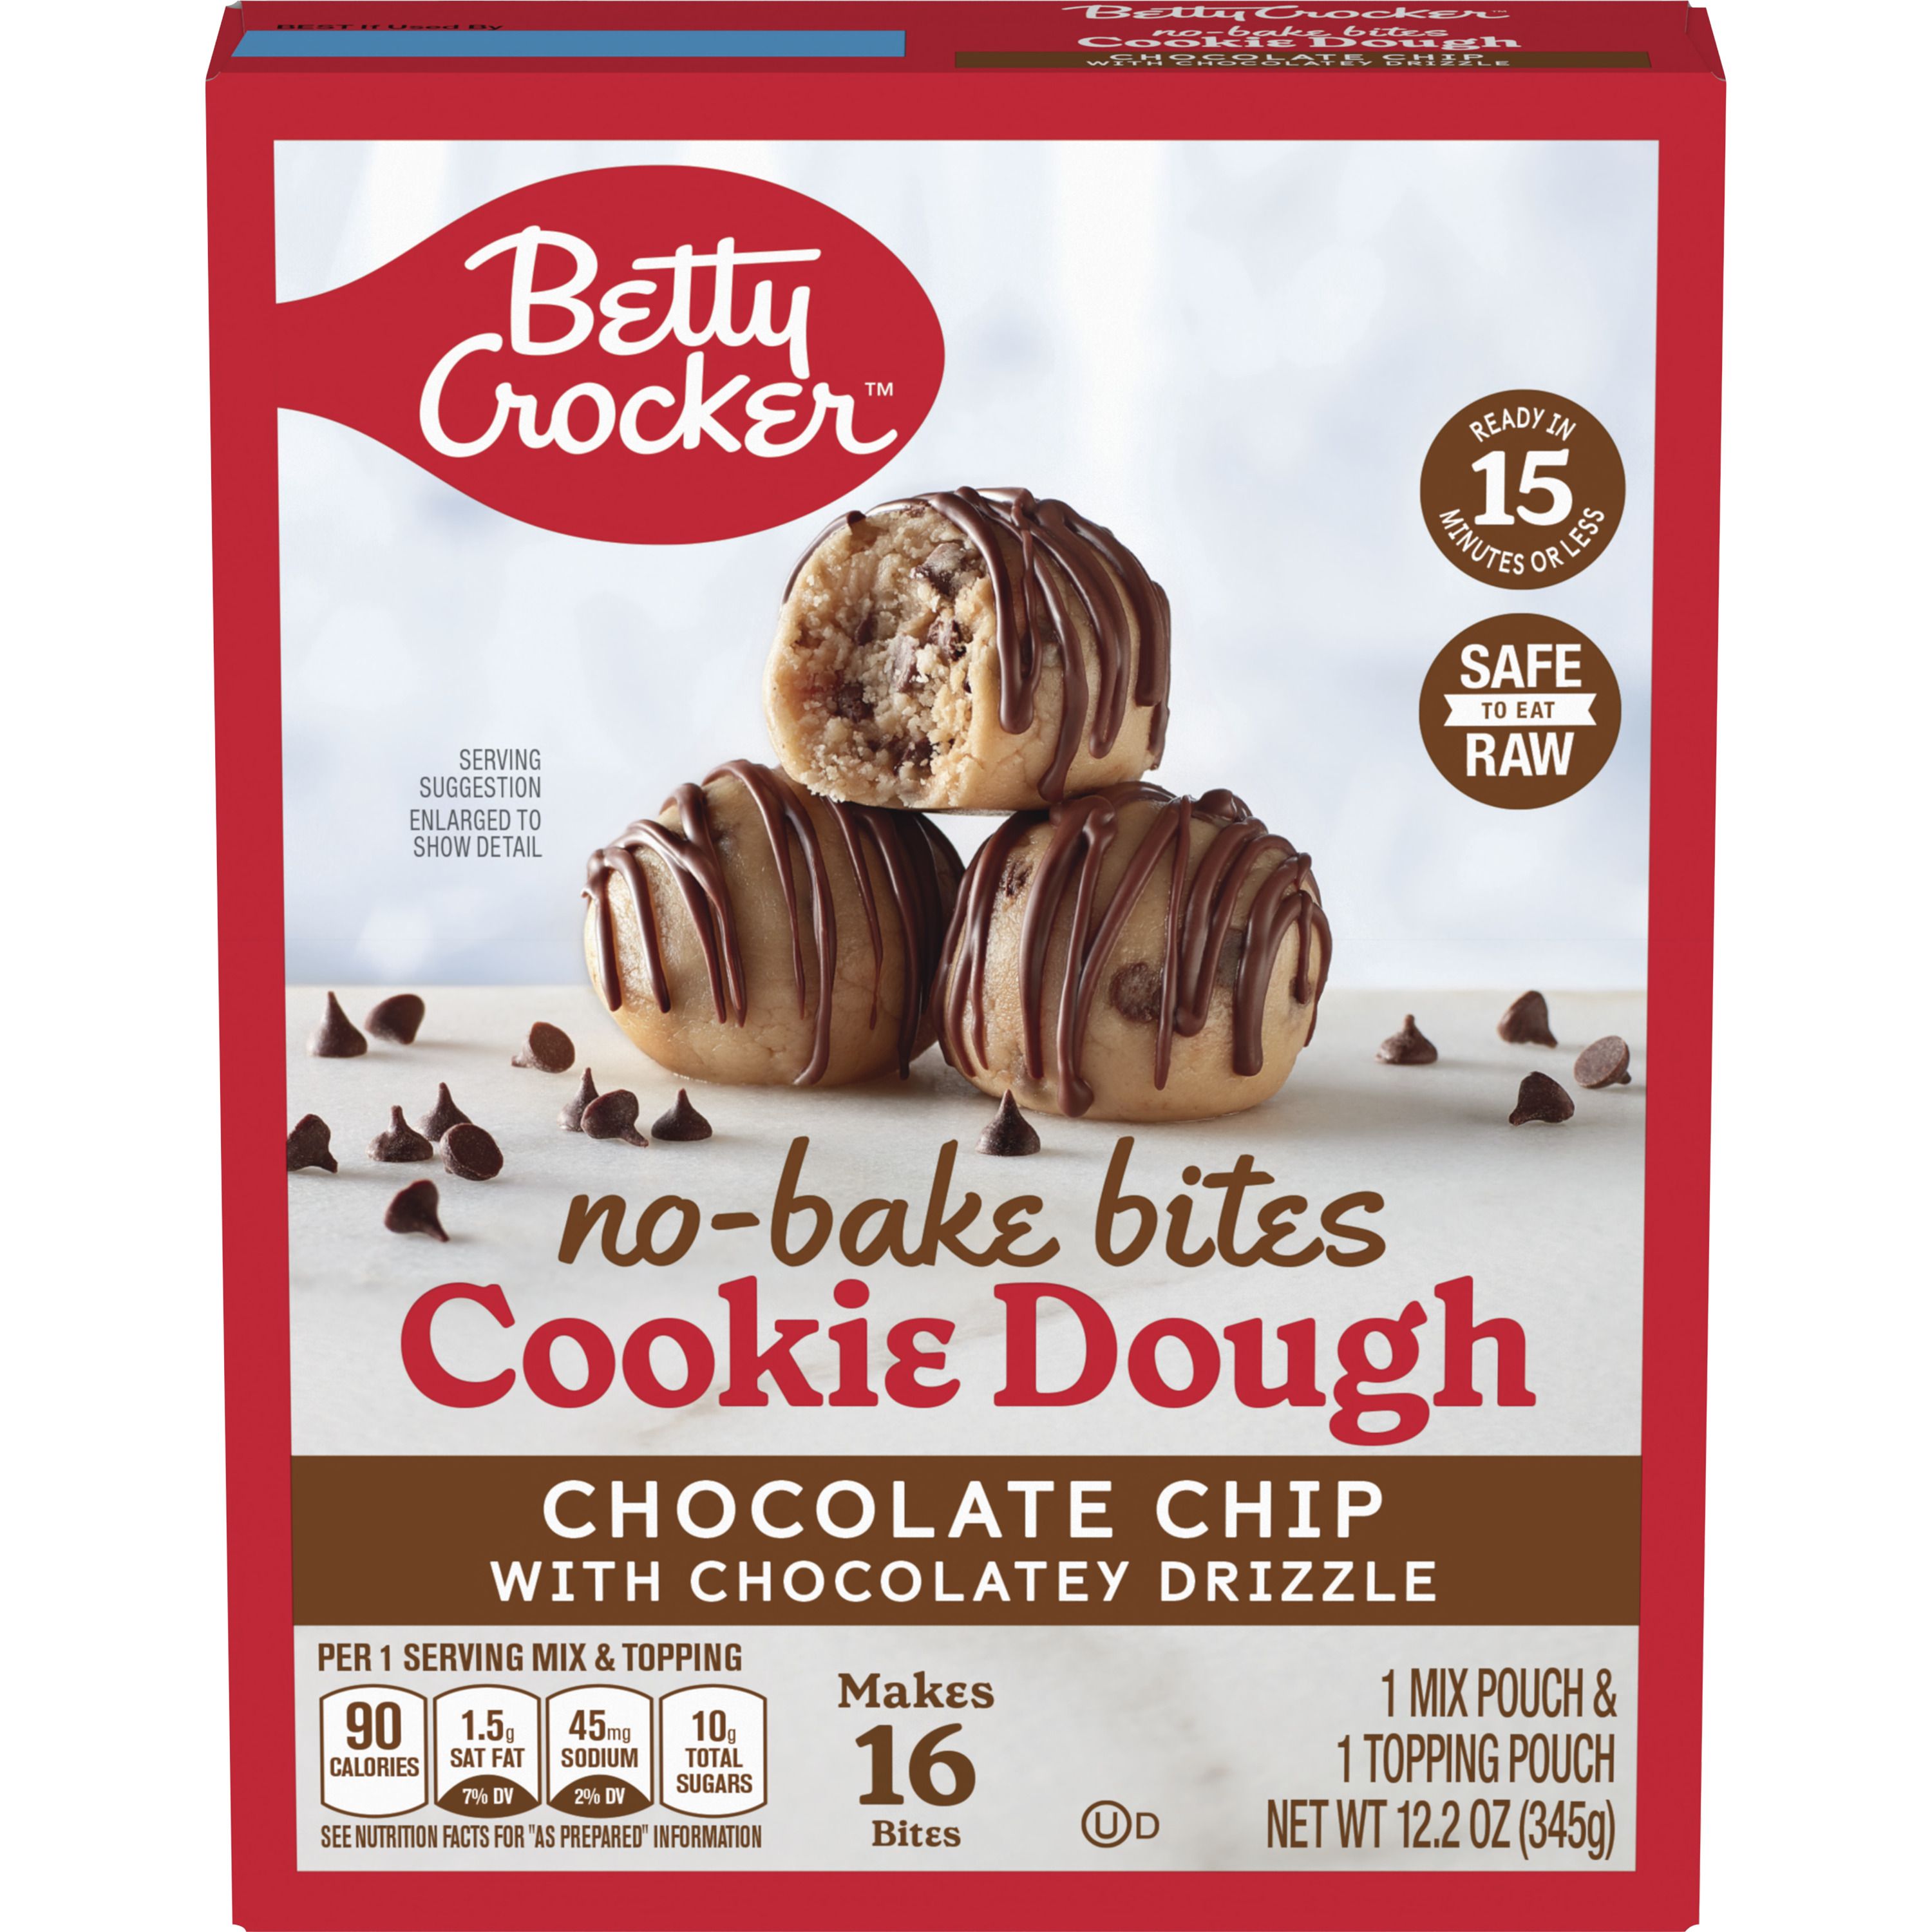 Betty Crocker™ No-Bake Bites Cookie Dough, Chocolate Chip with Chocolatey Drizzle - Front